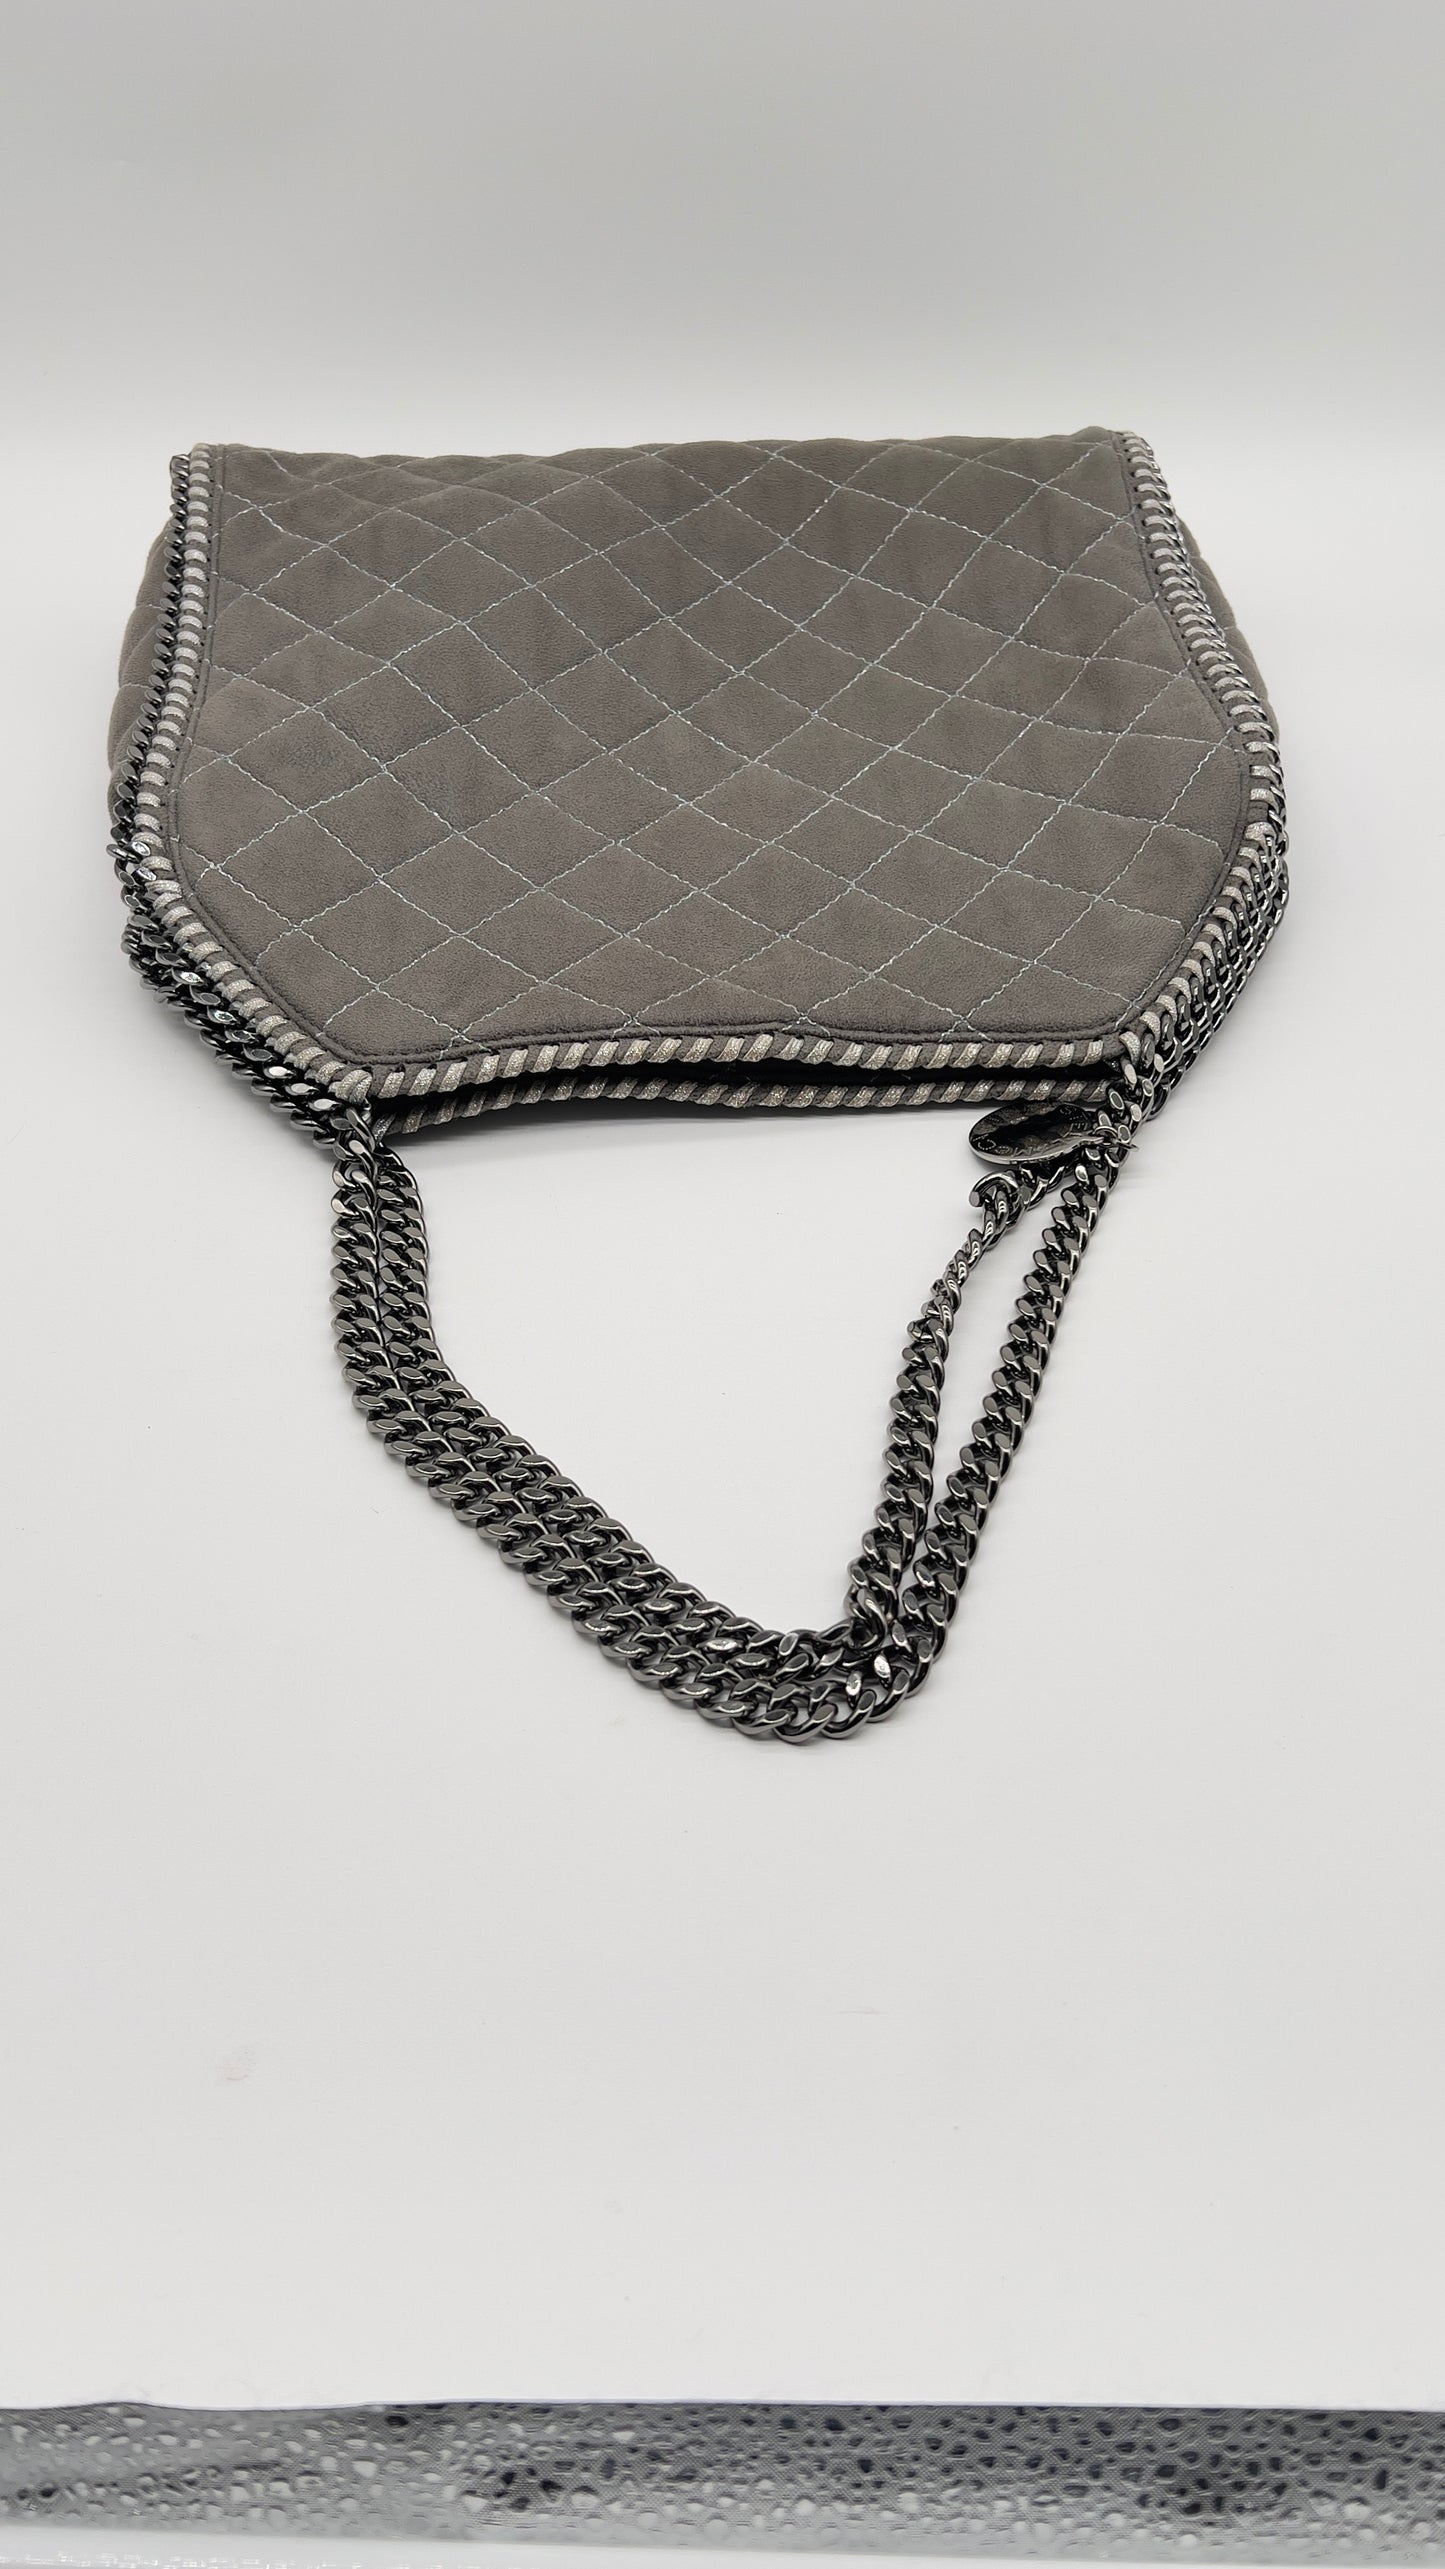 Pre-Loved Luxury Stella McCartney Falabella Grey Quilted Handbag with Silver-Tone Accents and Wallet.